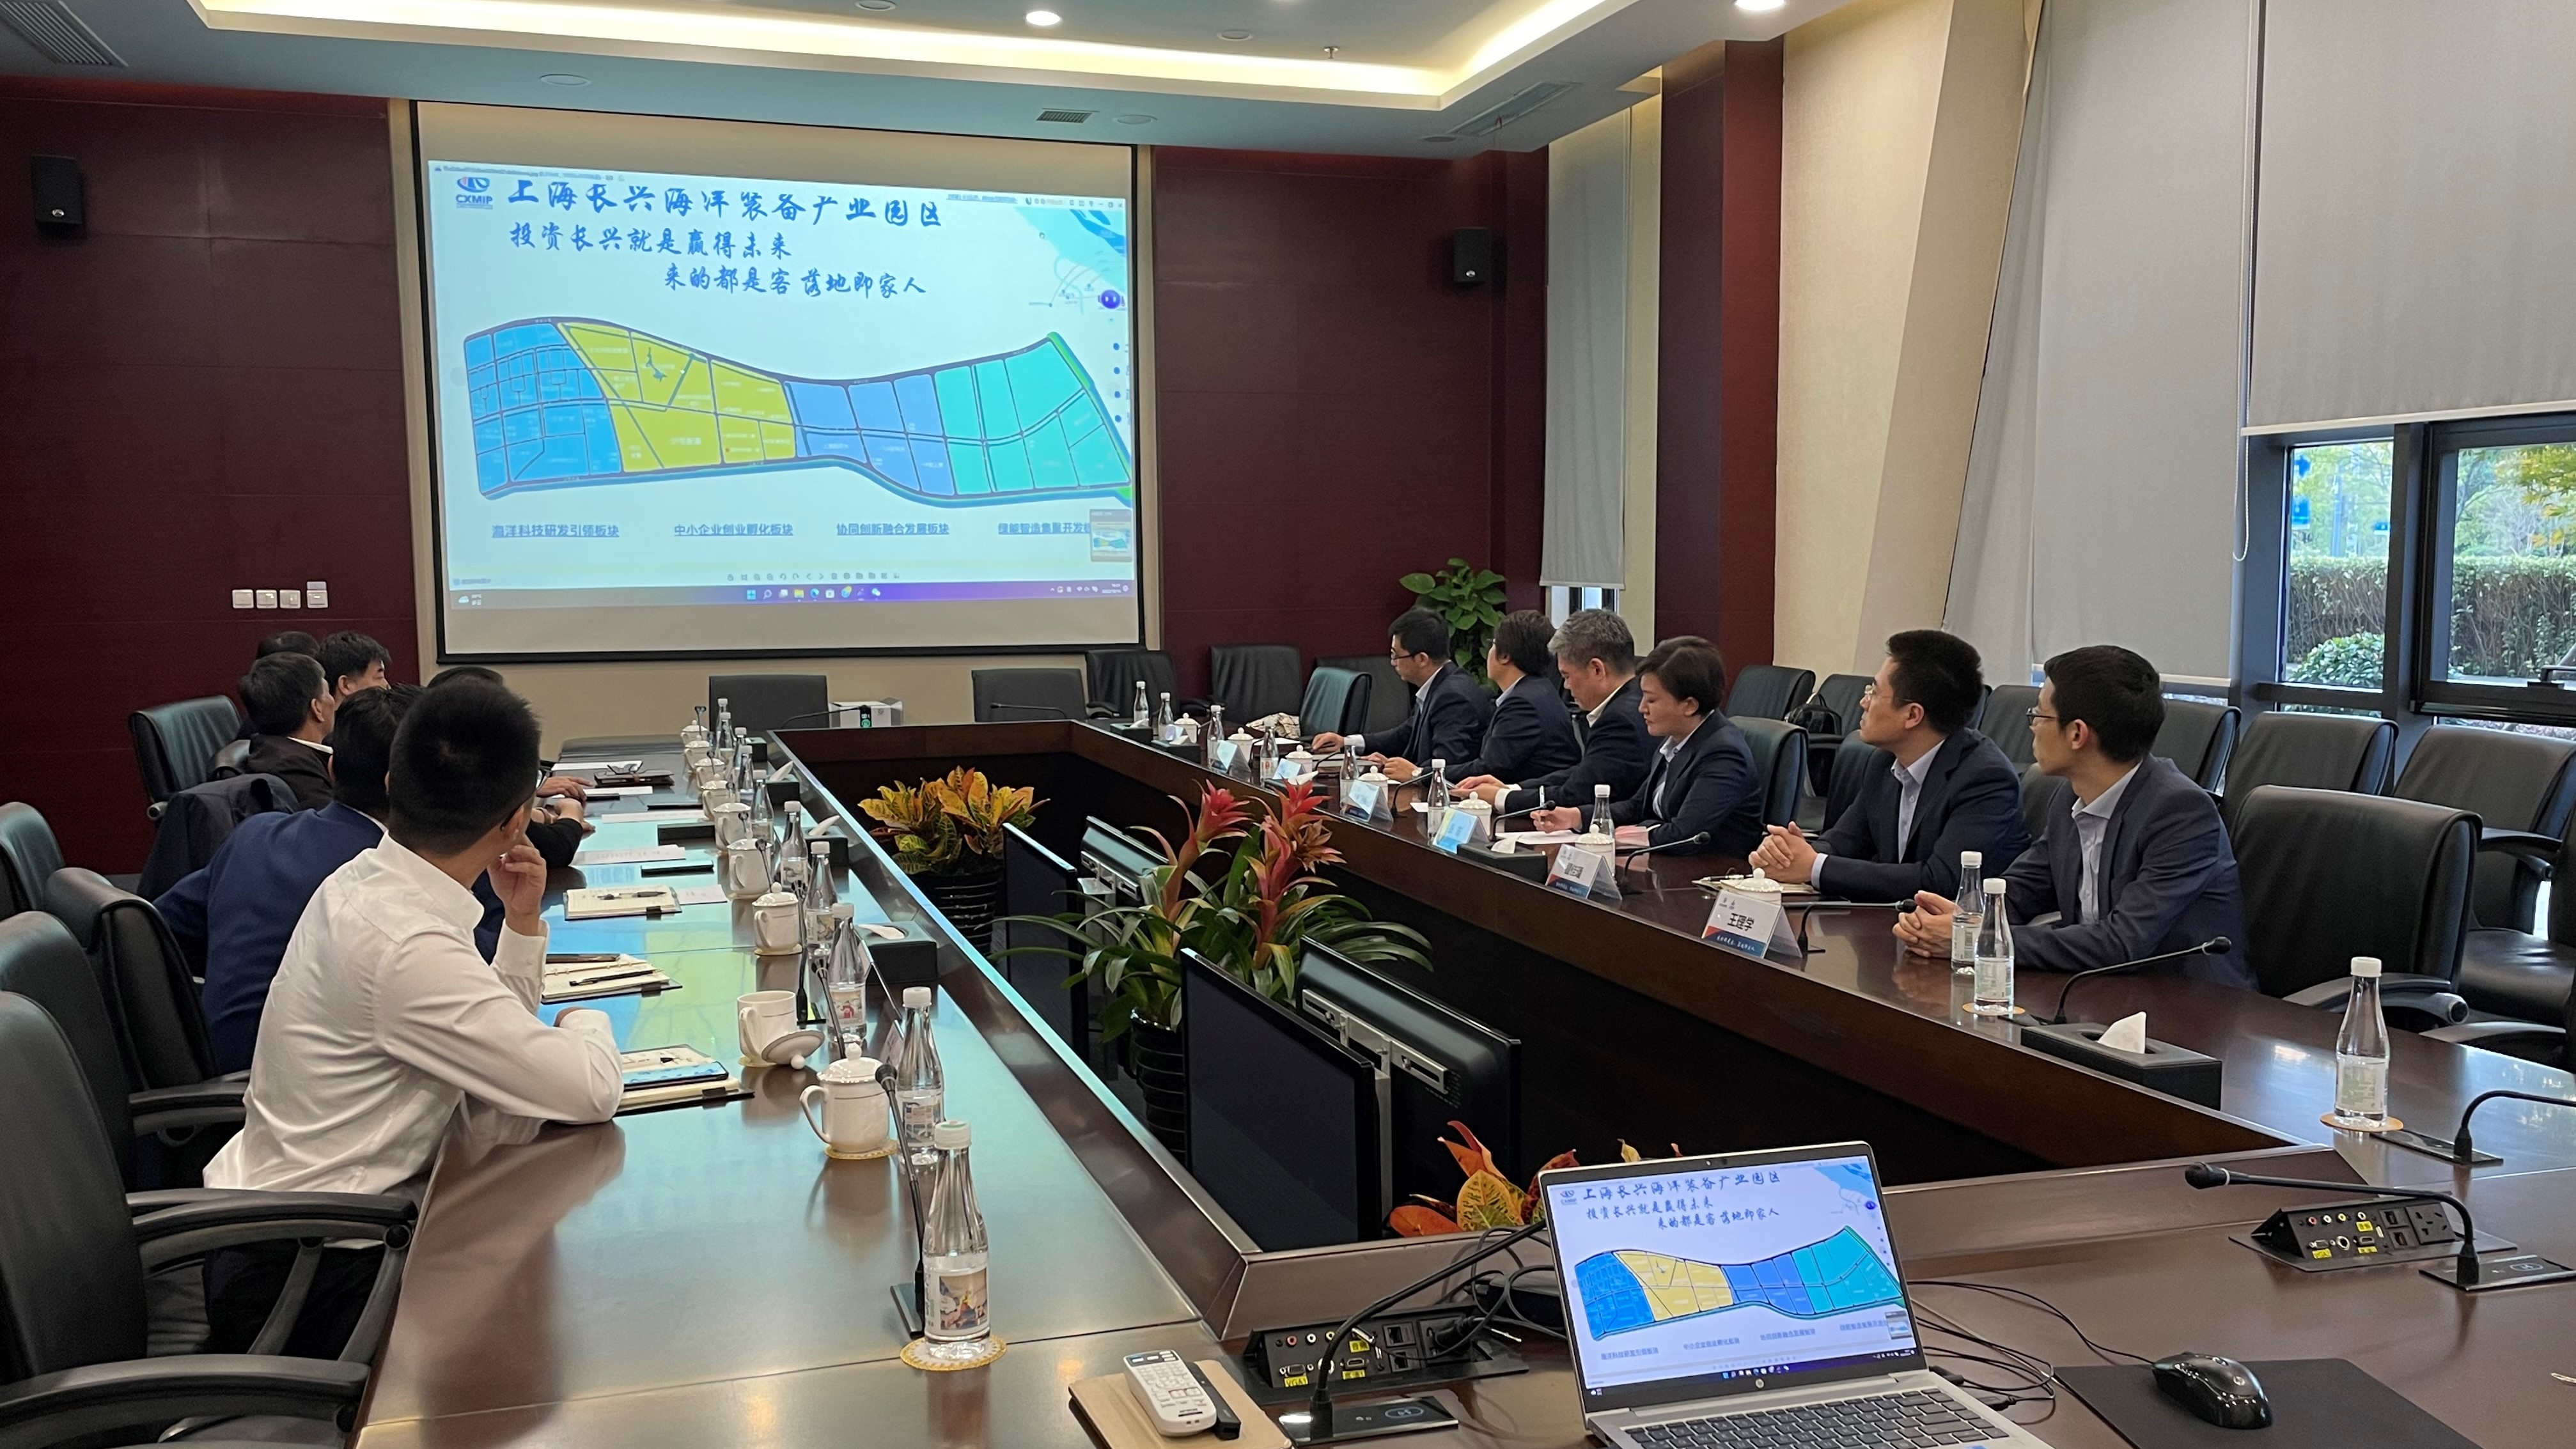 A Delegation Led by Zhao Guo'ang, Secretary of the CPC Committee and Chairman of China Haisum, Visits Shanghai Changxing Enterprise Group Co., Ltd.